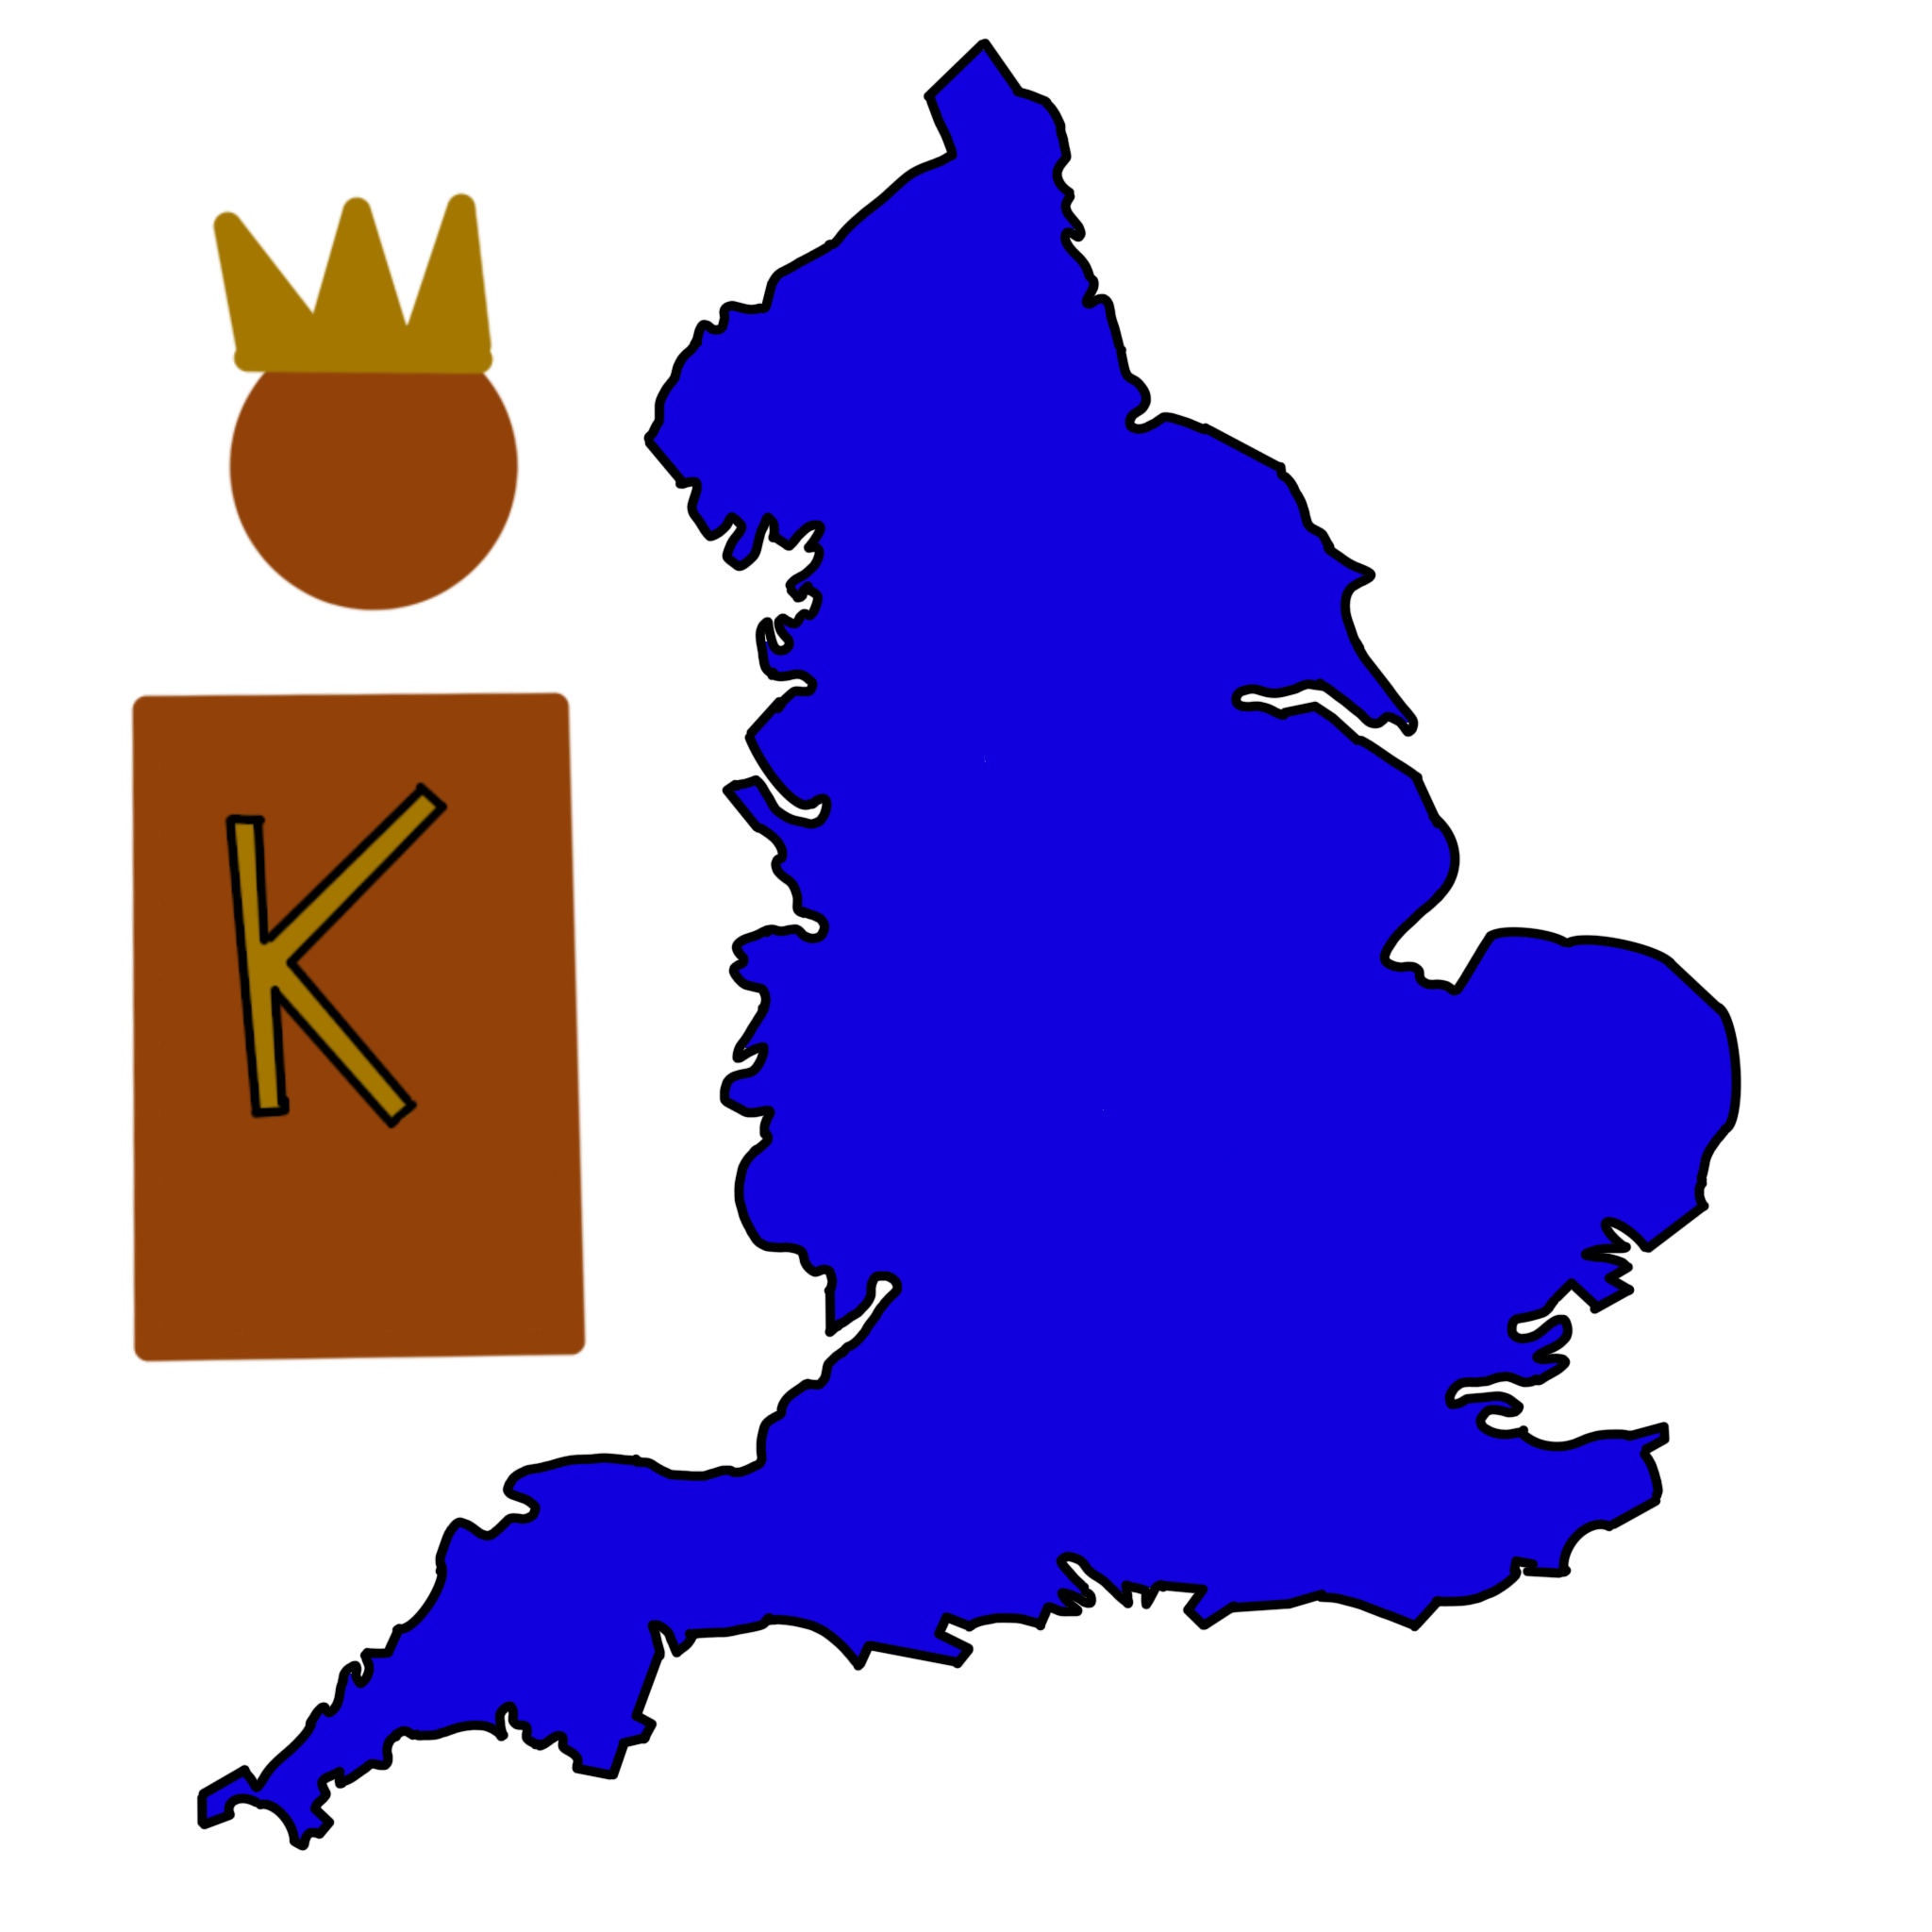 A drawing of England with a simply drawn person next to it. The person is red-brown with a gold crown on their head. They also have a gold K on their chest. England is colored bright blue